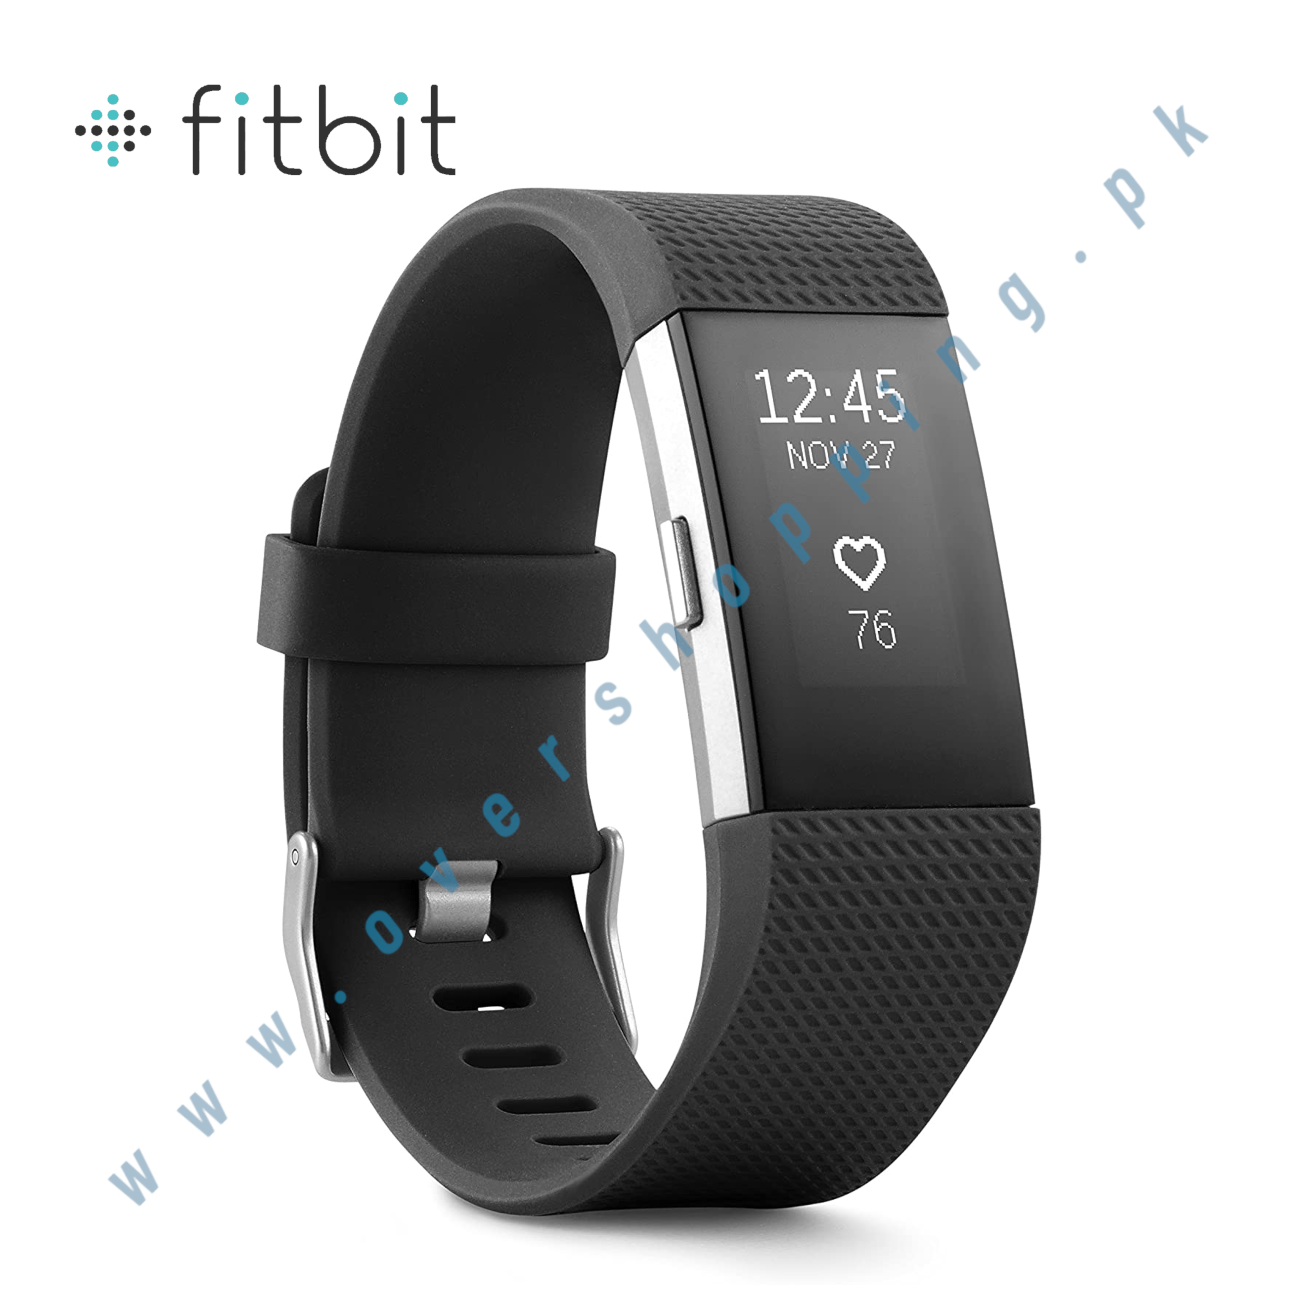 Fitbit Charge 2 Heart Rate + Fitness Wristband, Black, Large